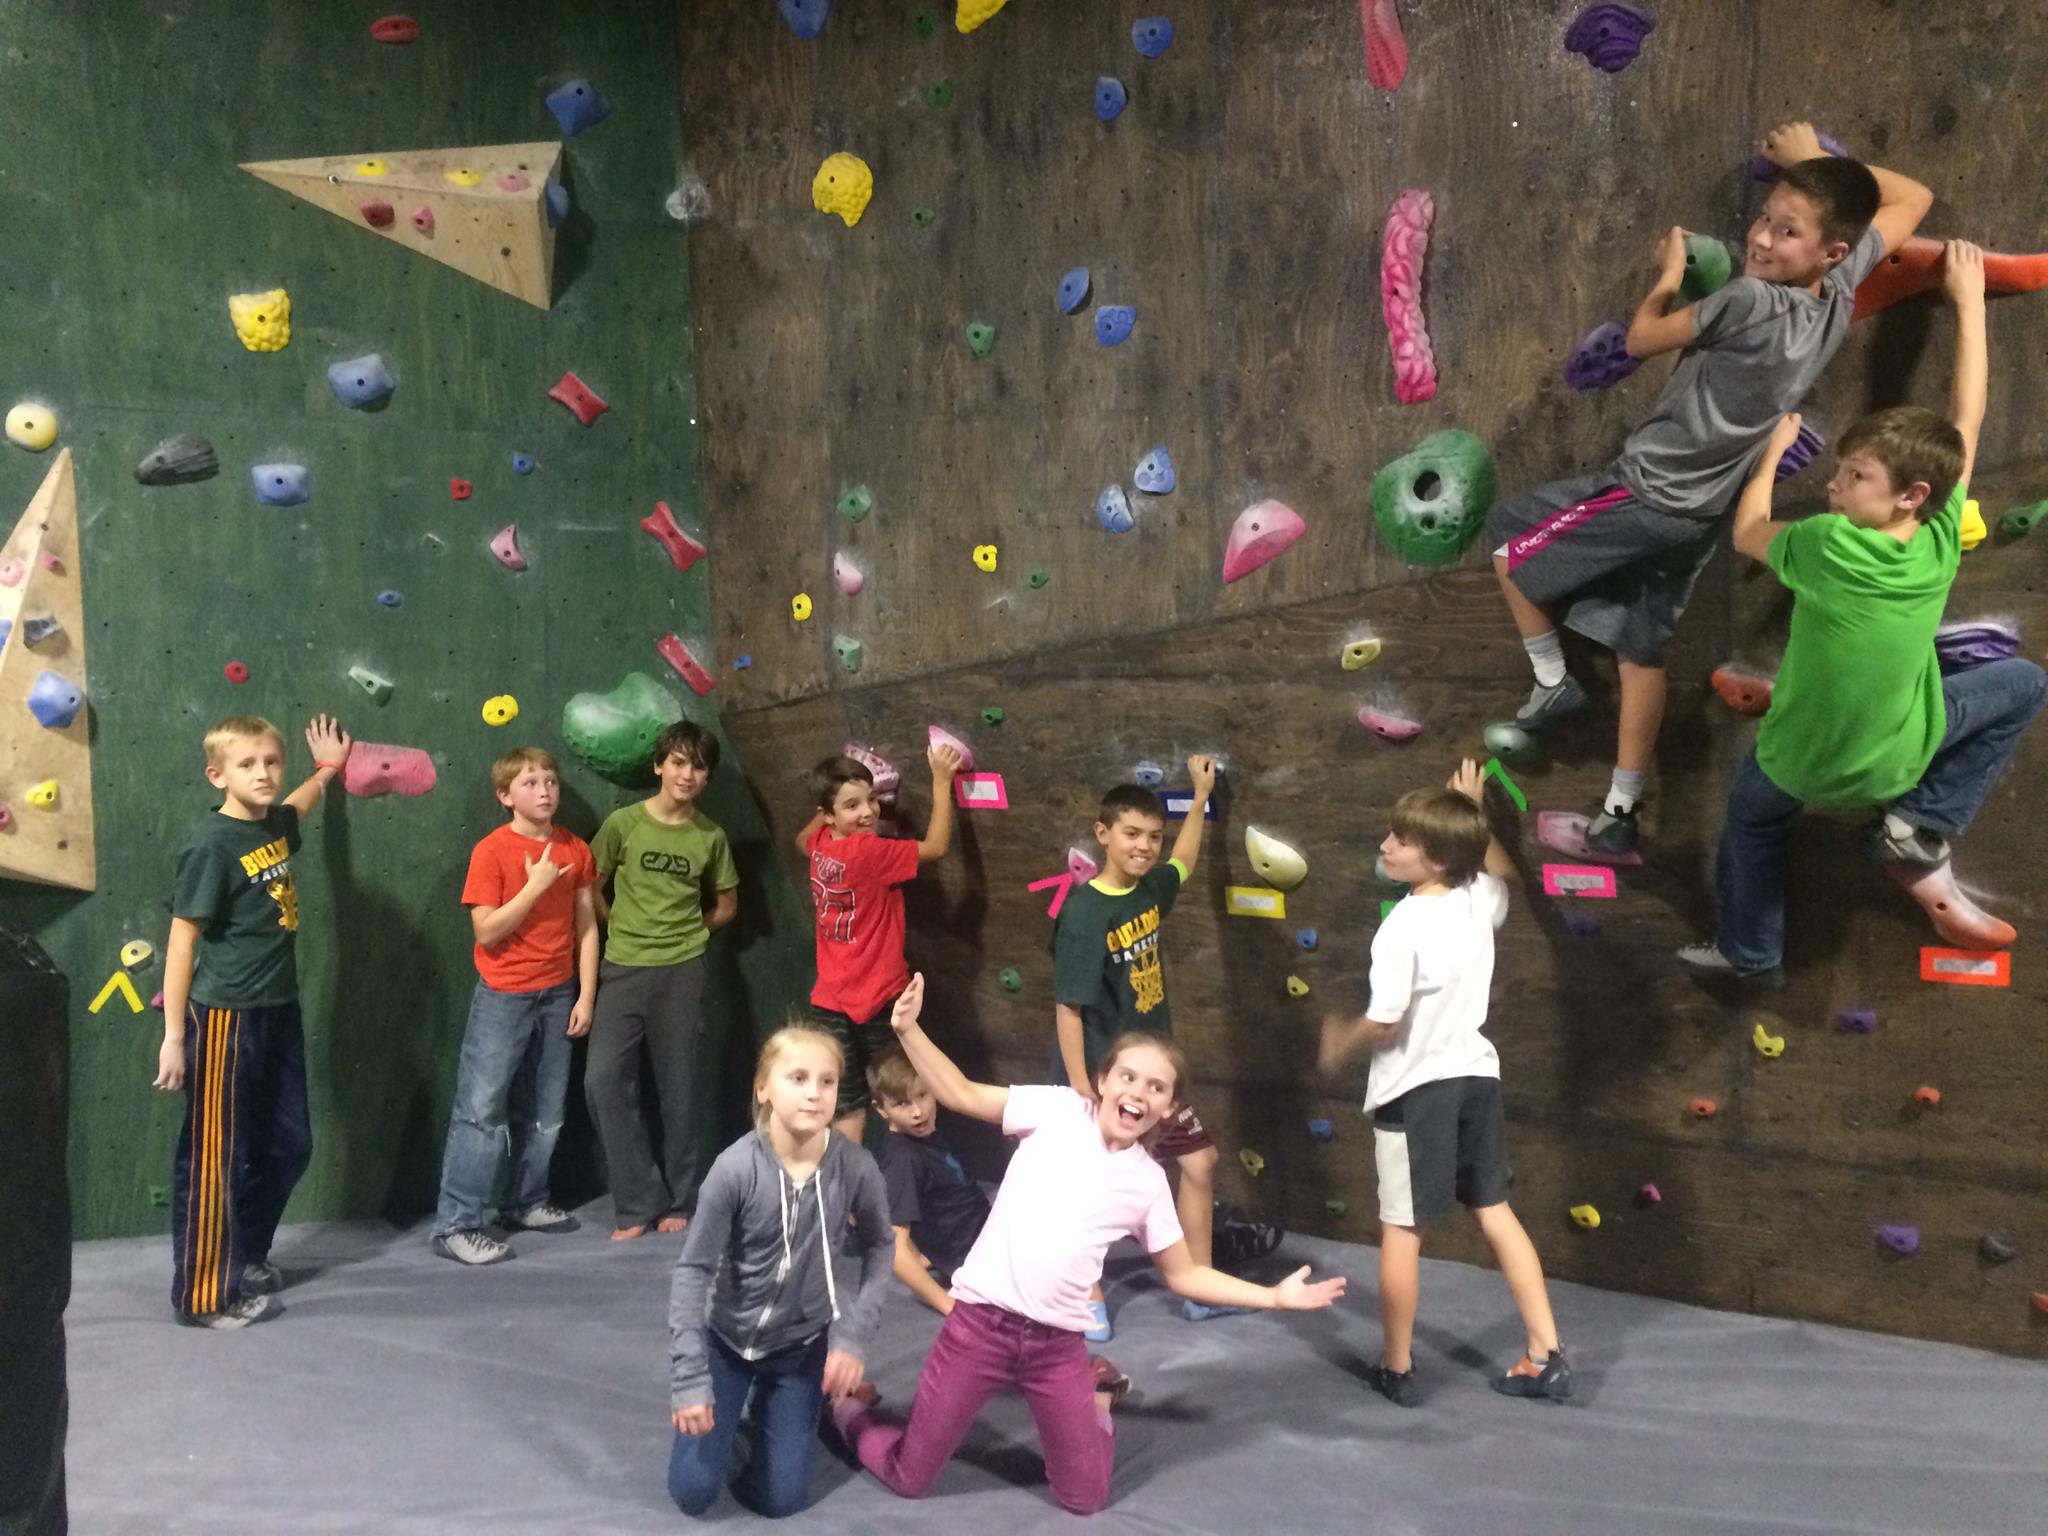 Host Your Next Event at Rockfish! | Rockfish Climbing & Fitness